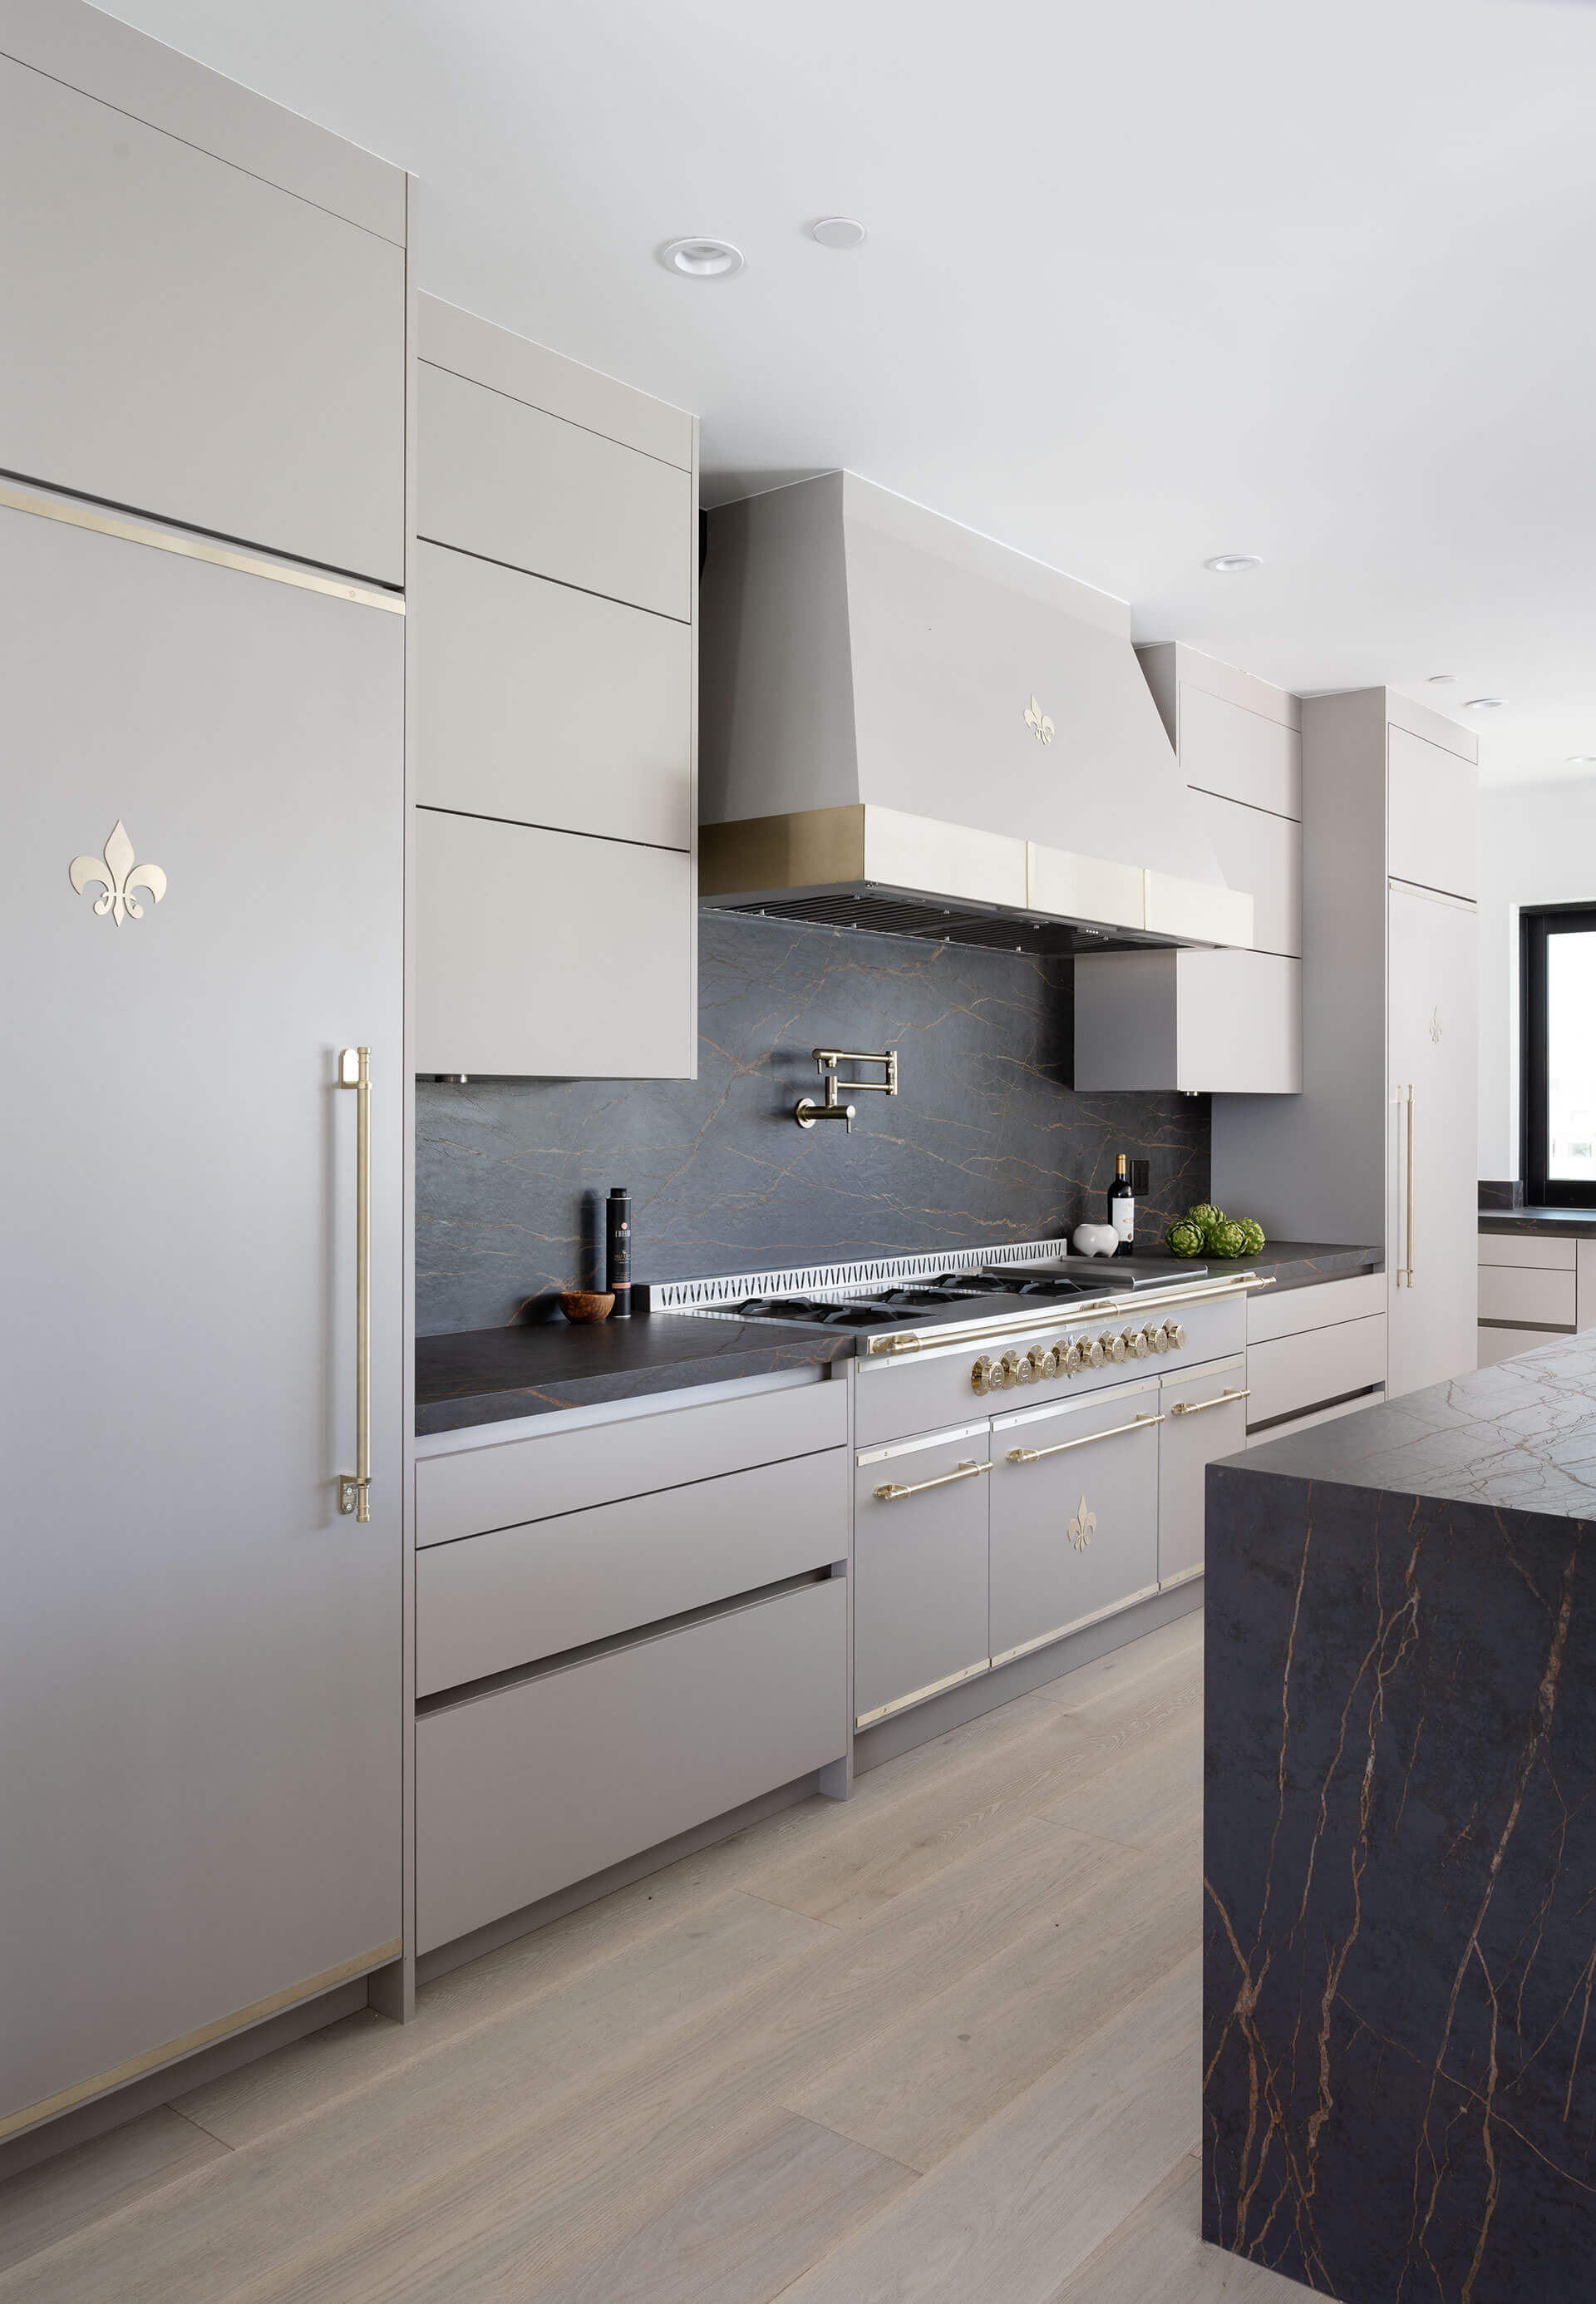 White classic kitchen ranges with French stove, luxury cabinets, luxury gas ranges